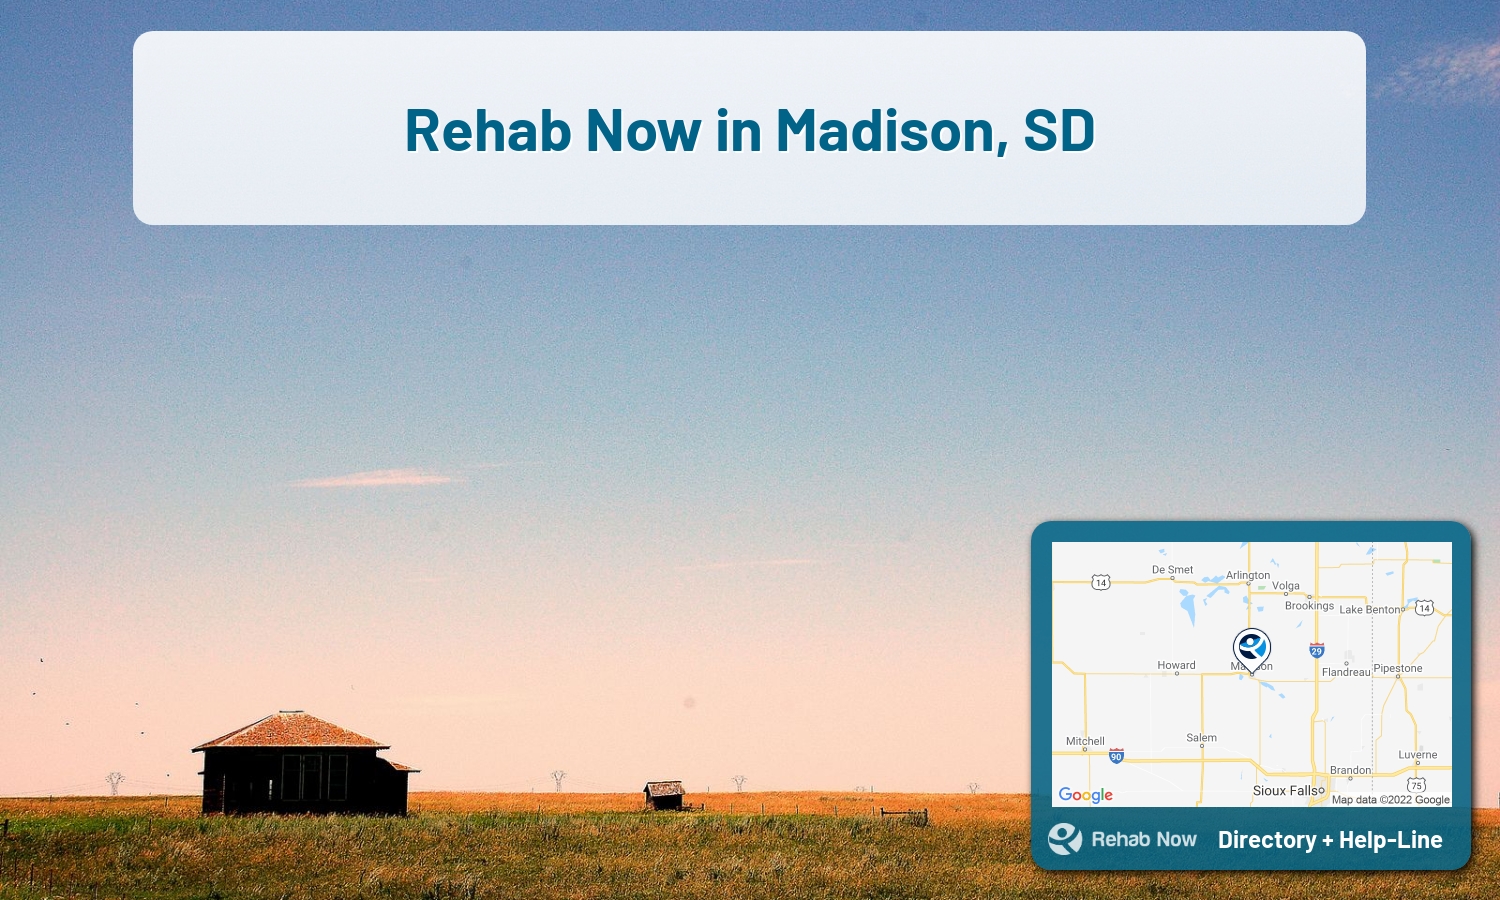 Drug rehab and alcohol treatment services near you in Madison, South Dakota. Need help choosing a center? Call us, free.